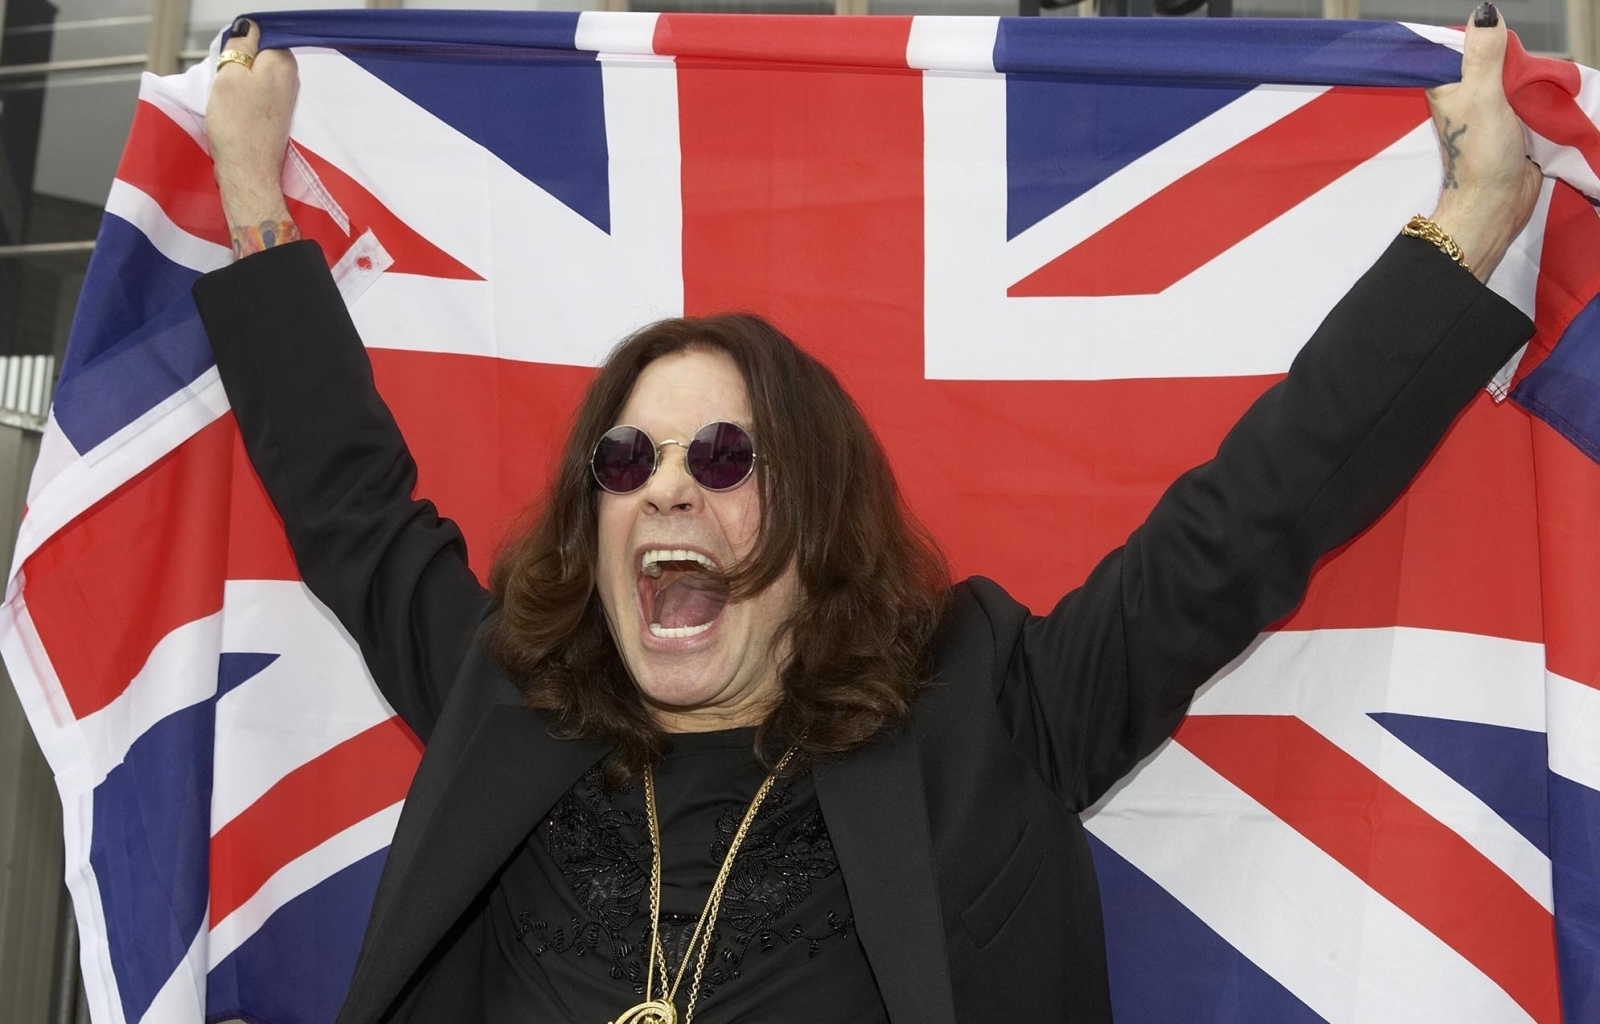 42272 3840x1080 PC pictures for free, download ozzy osbourne, men, people 3840x1080 wallpapers on your desktop